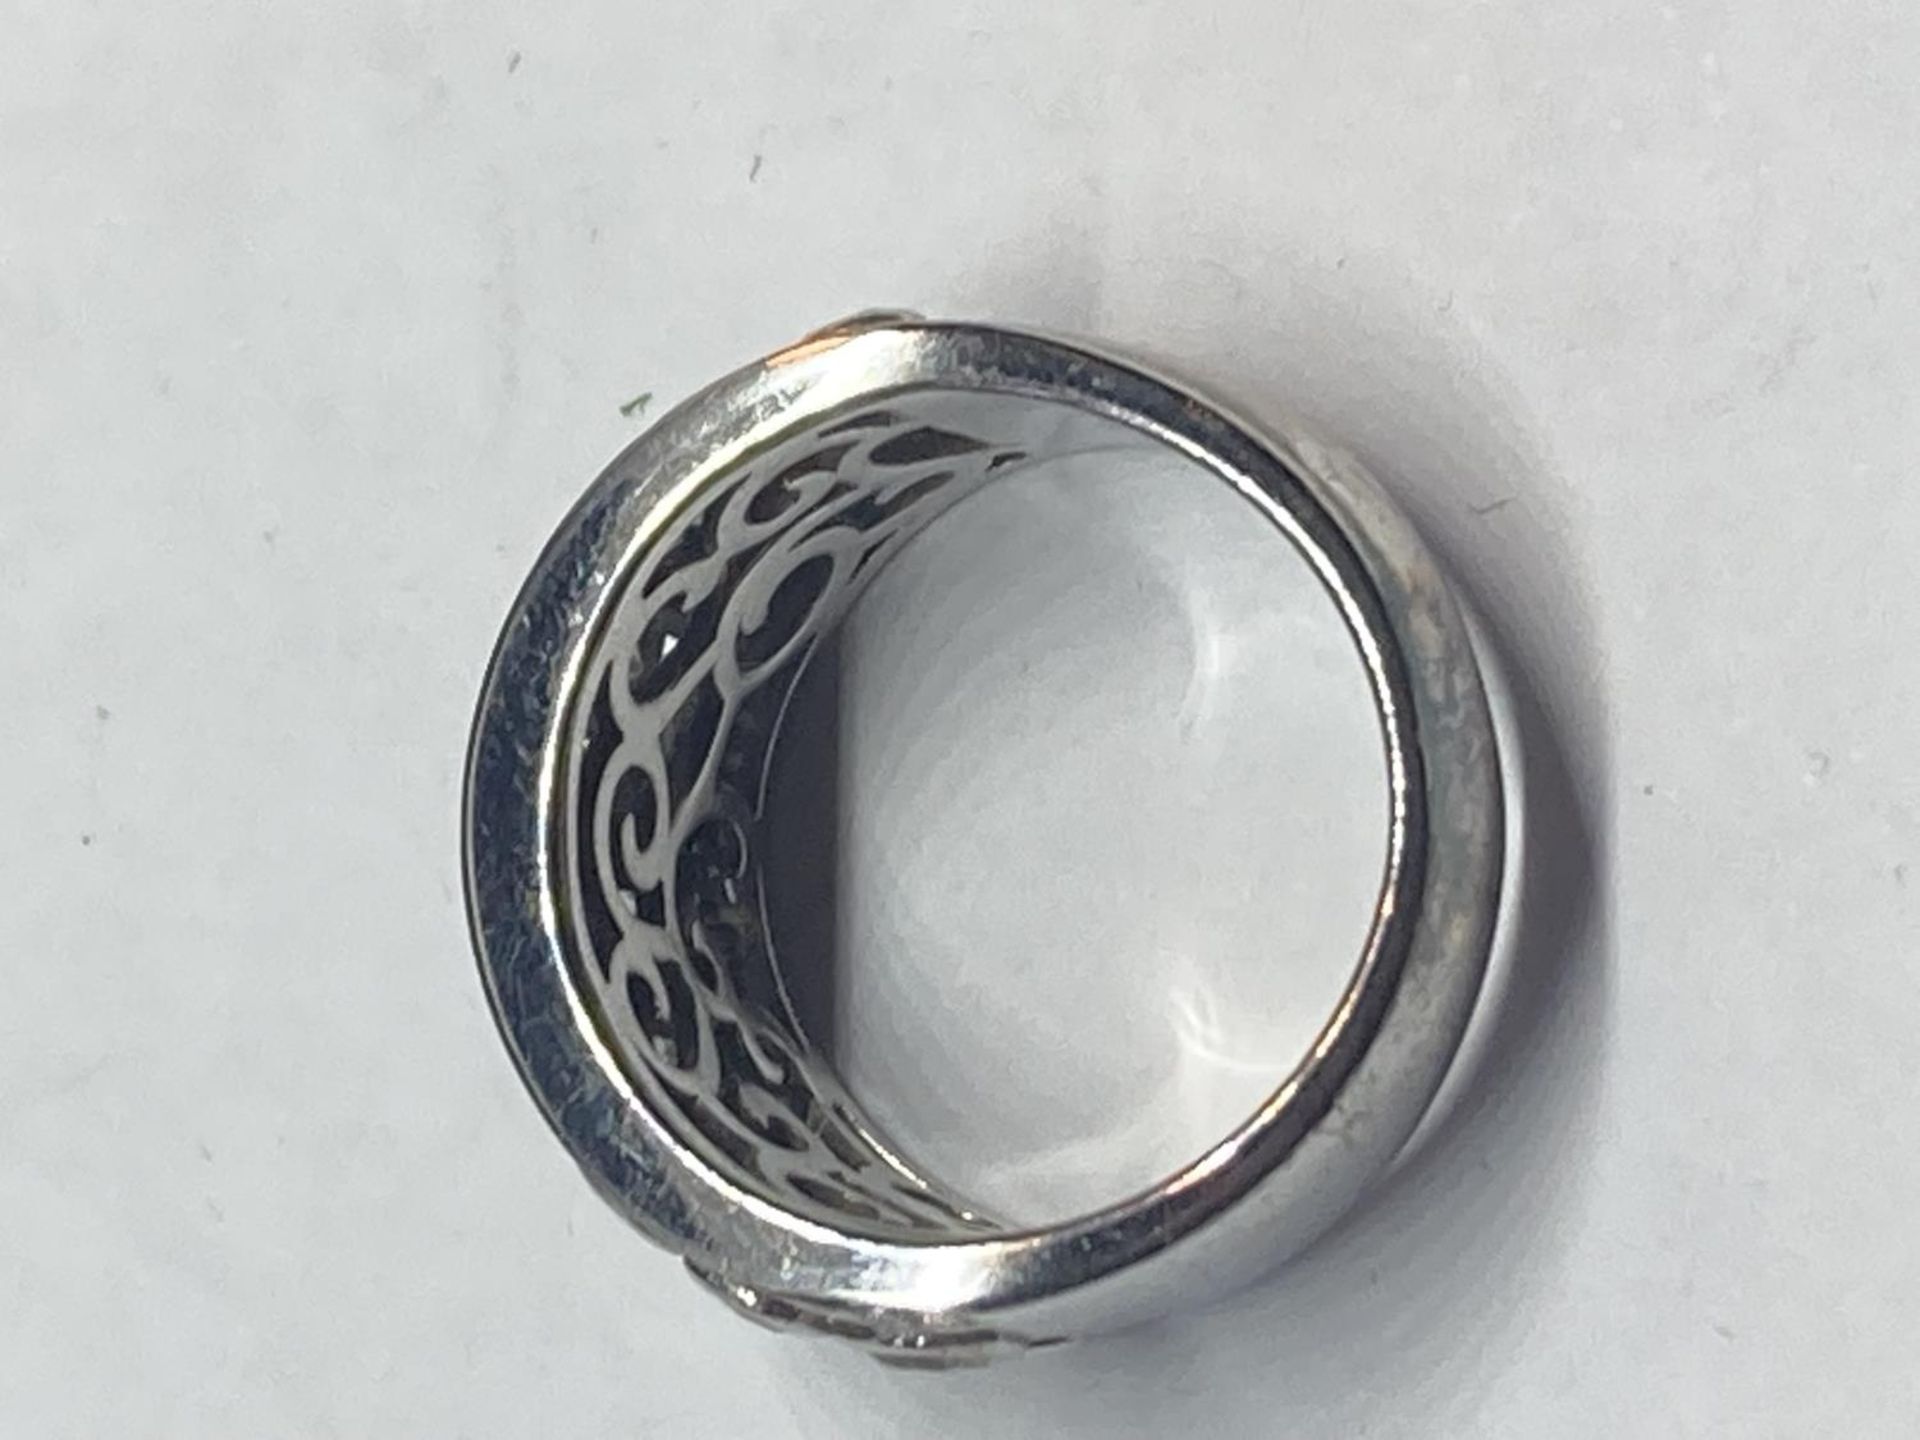 A SILVER DRESS RING IN A PRESENTATION BOX - Image 4 of 4